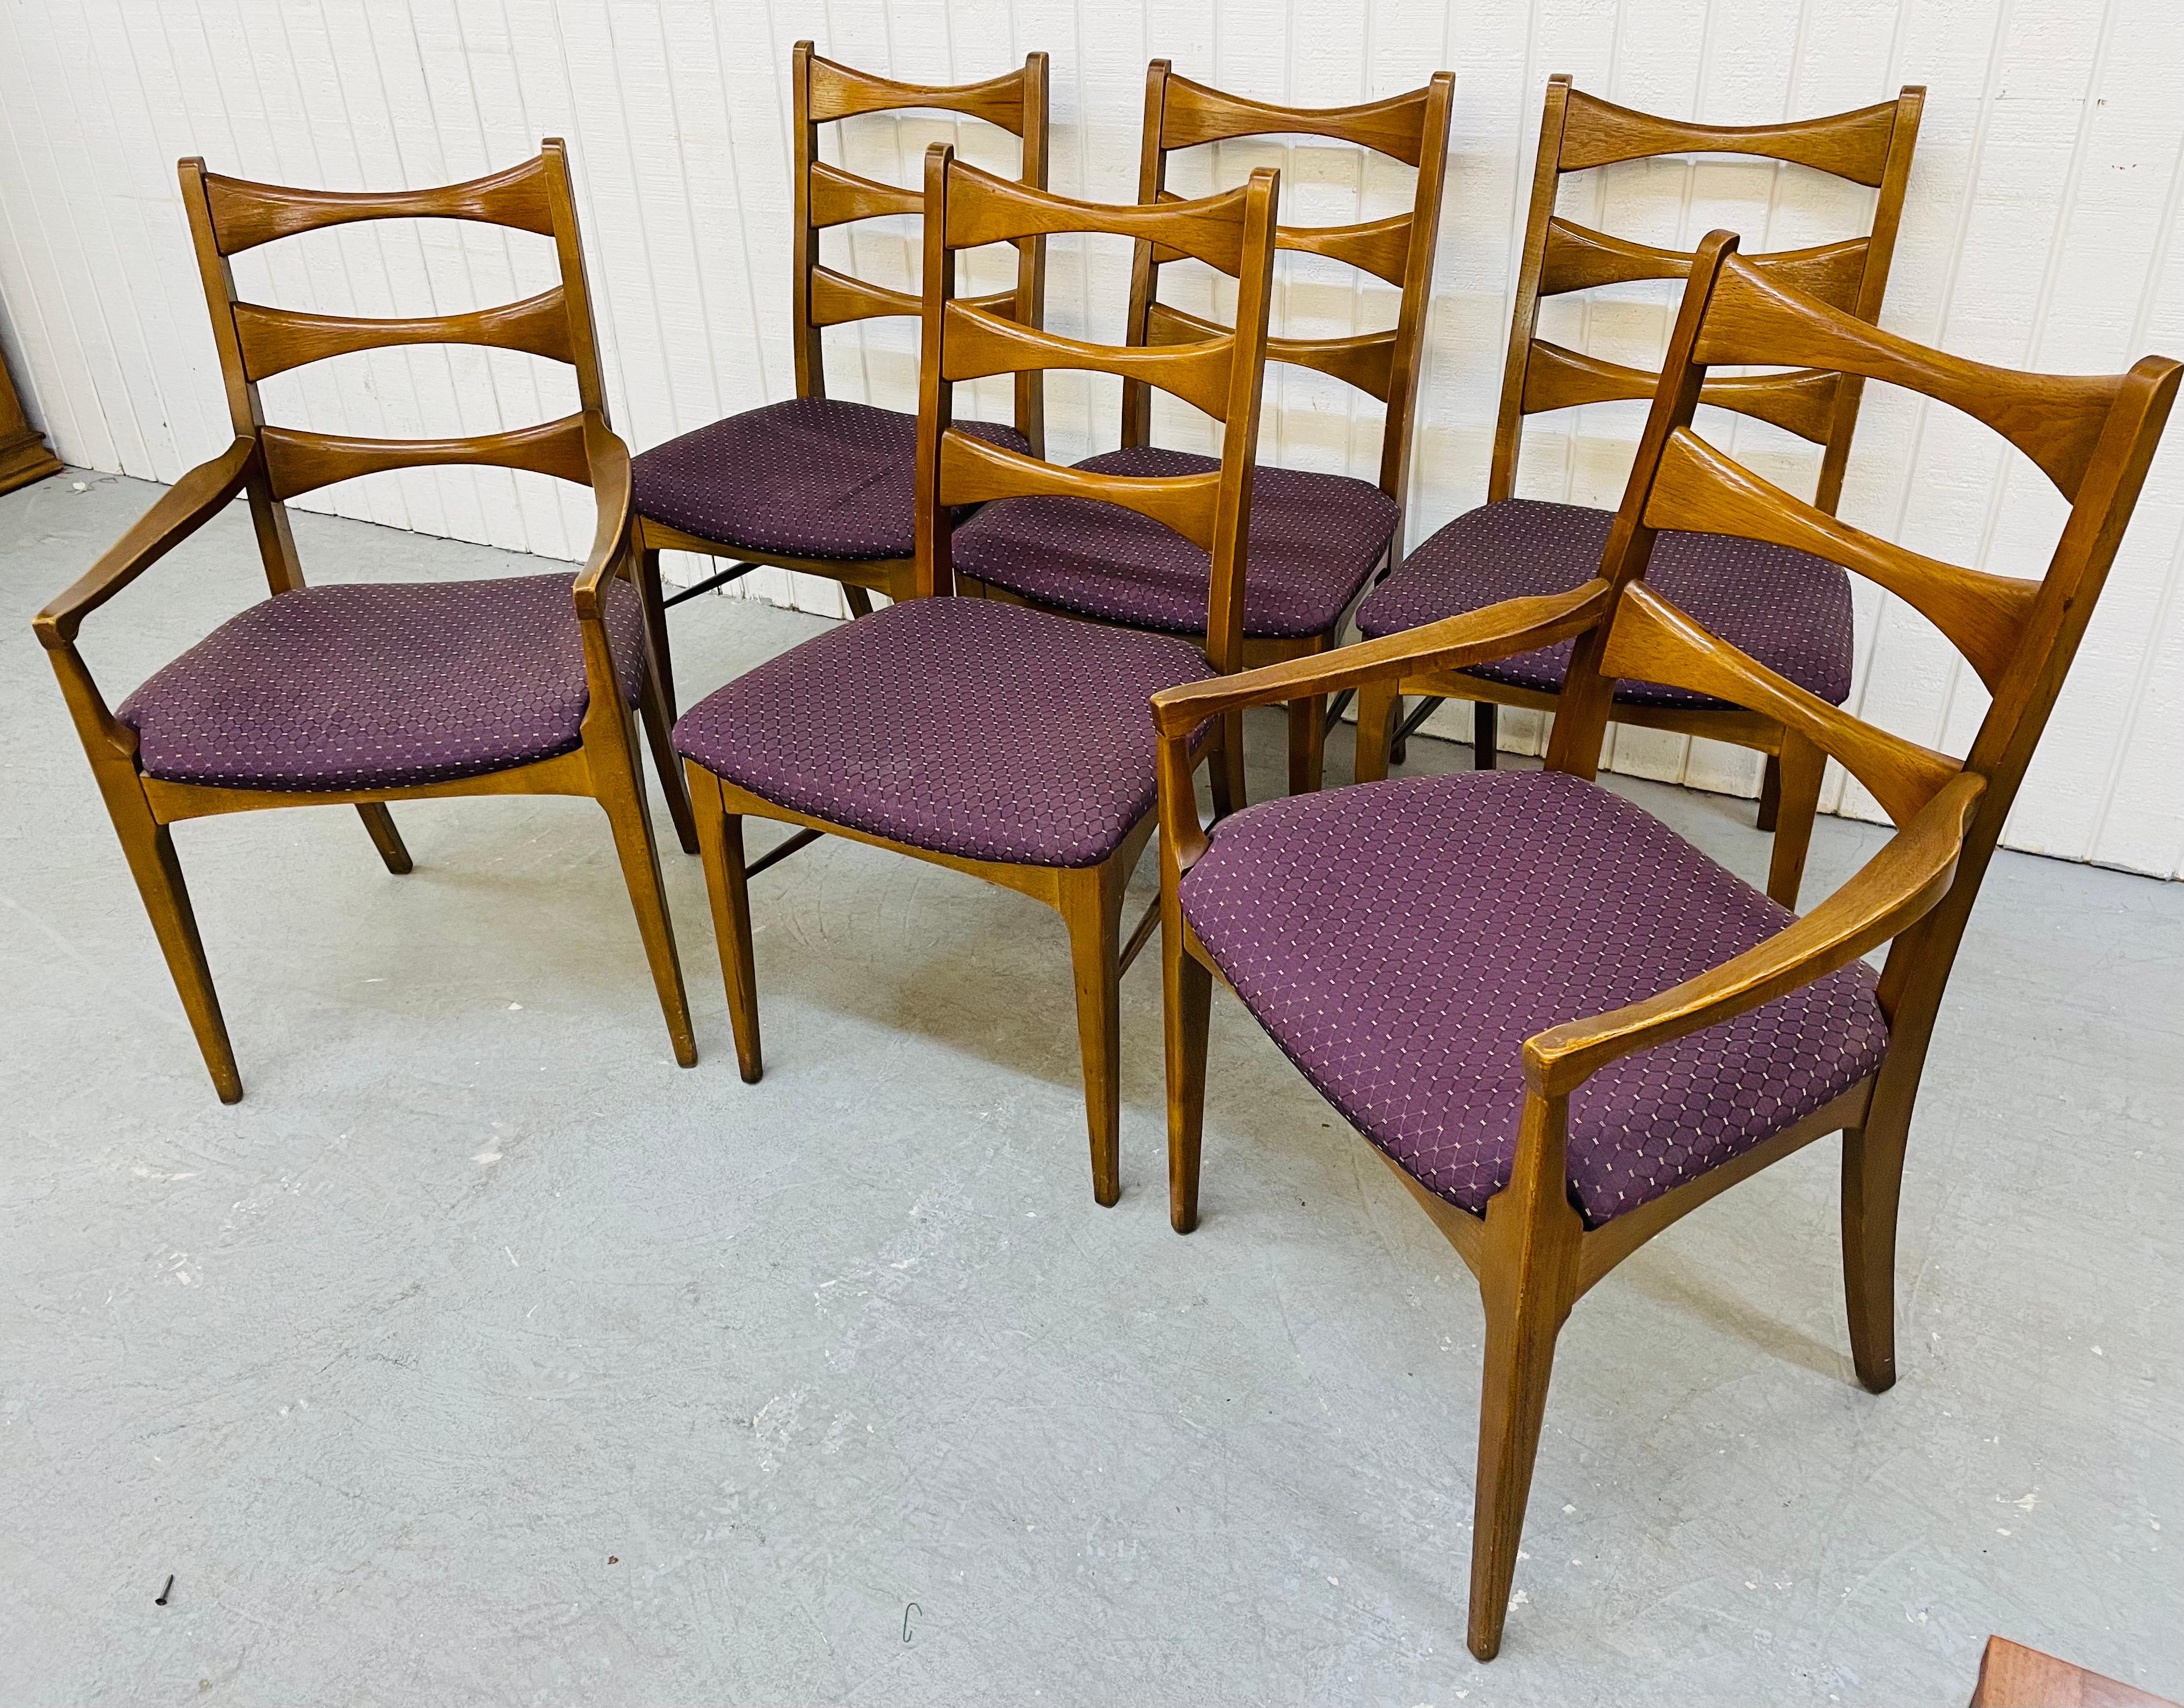 This listing is for a set of six mid-century Lane rhythm walnut dining chairs. Featuring four straights, two arm chairs, ladder style back rest, purple upholstered cushions, and a beautiful walnut finish.